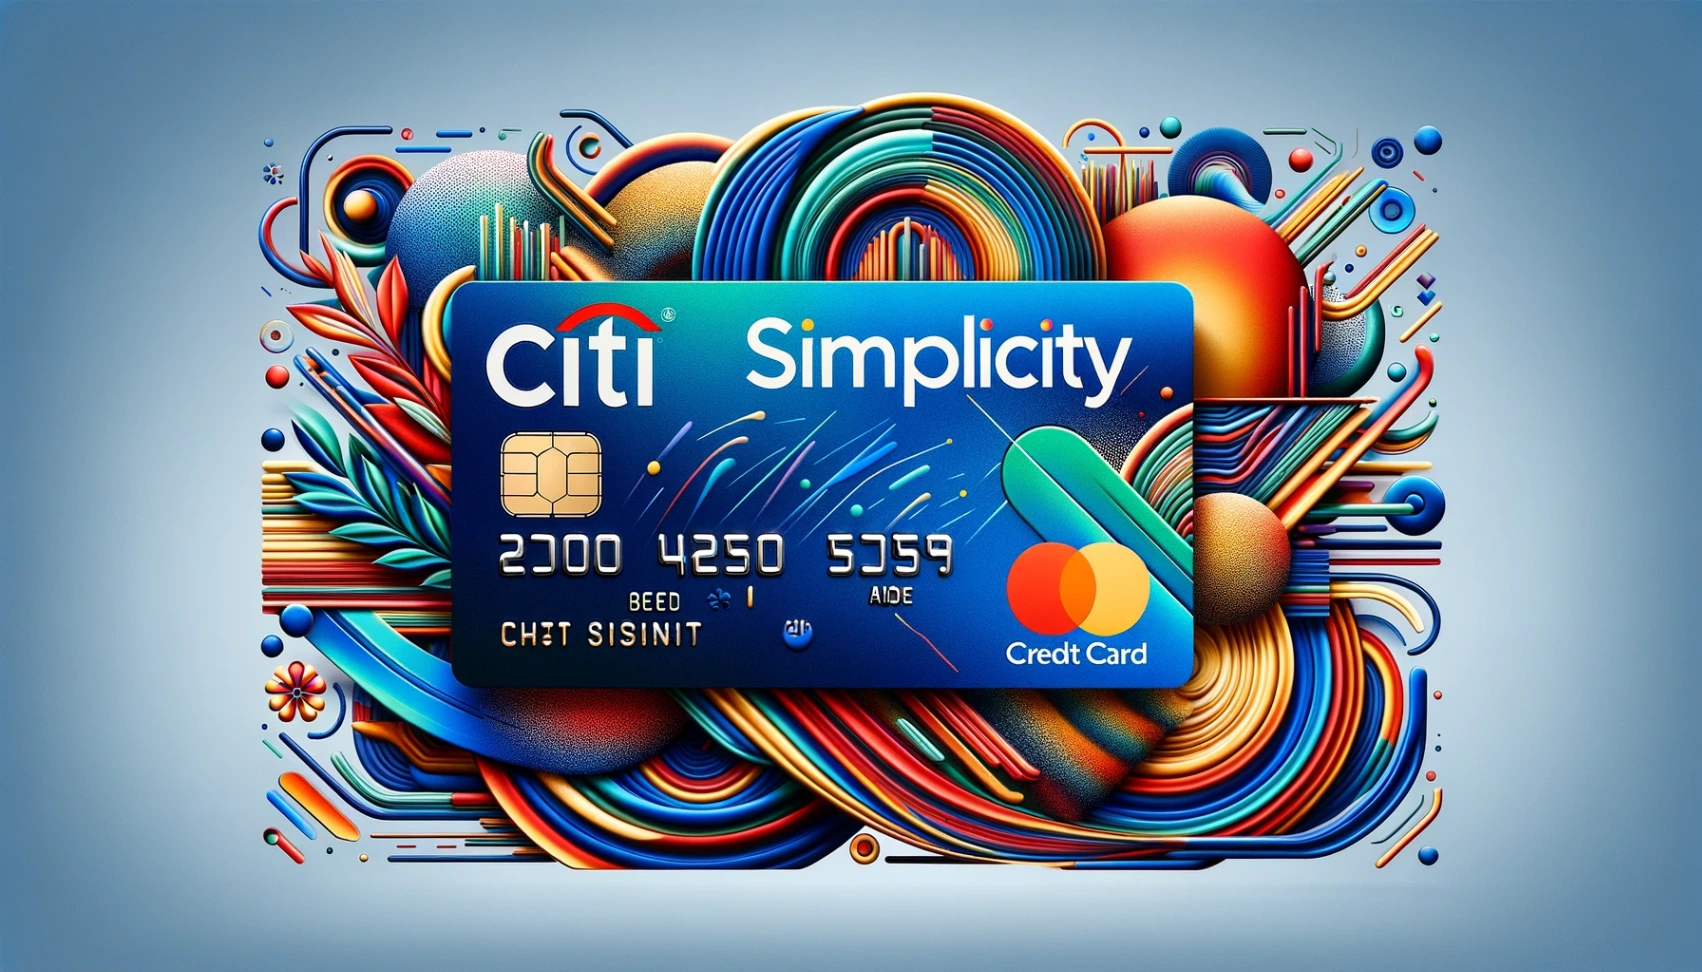 Citi Simplicity Credit Card – Learn How to Apply Online